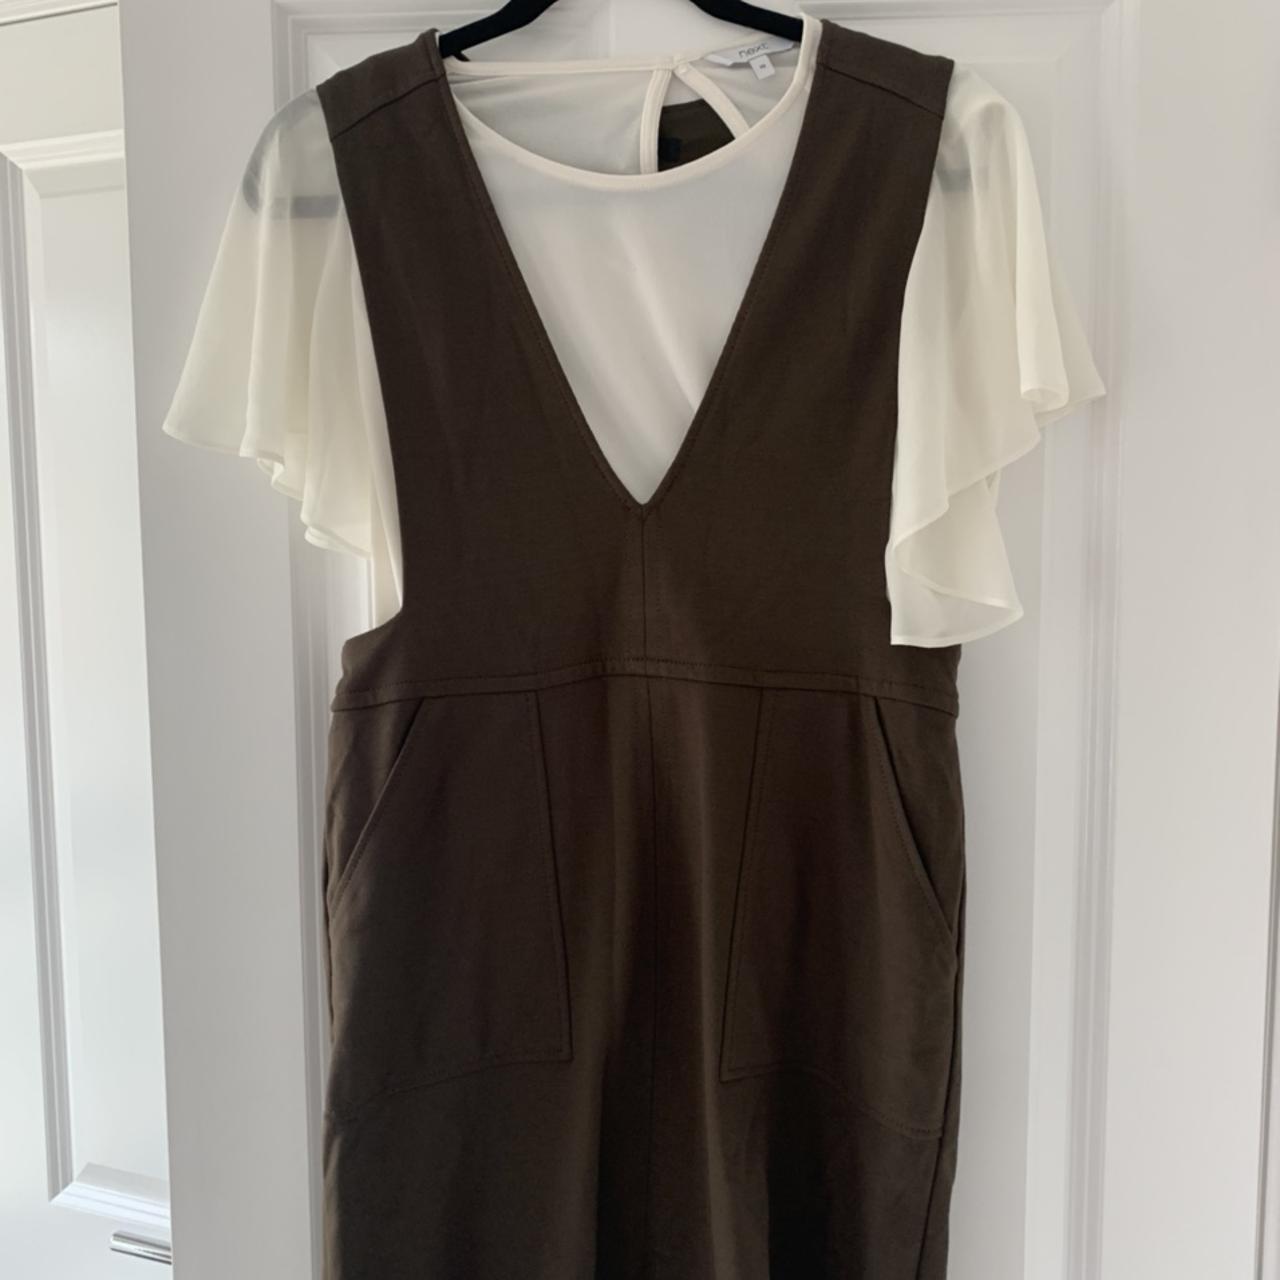 Next pinafore dress - can be worn together or... - Depop